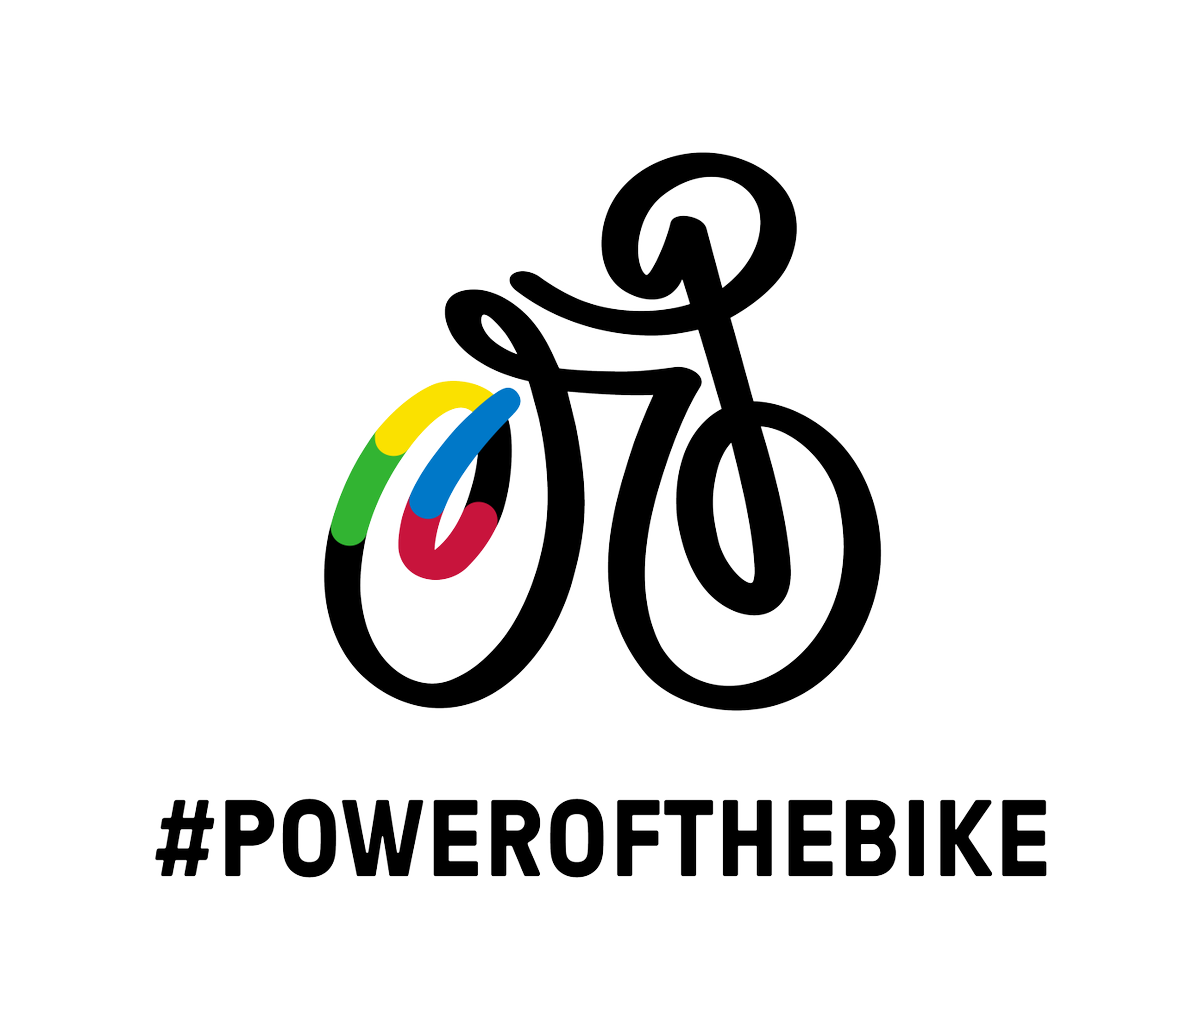 Want to get your business involved in the buzz around @CyclingWorlds this summer? This business toolkit from @VisitScotland will help you maximise the opportunity on your doorstep and harness the #PowerOfTheBike. Find out more – visitscotland.org/supporting-you…